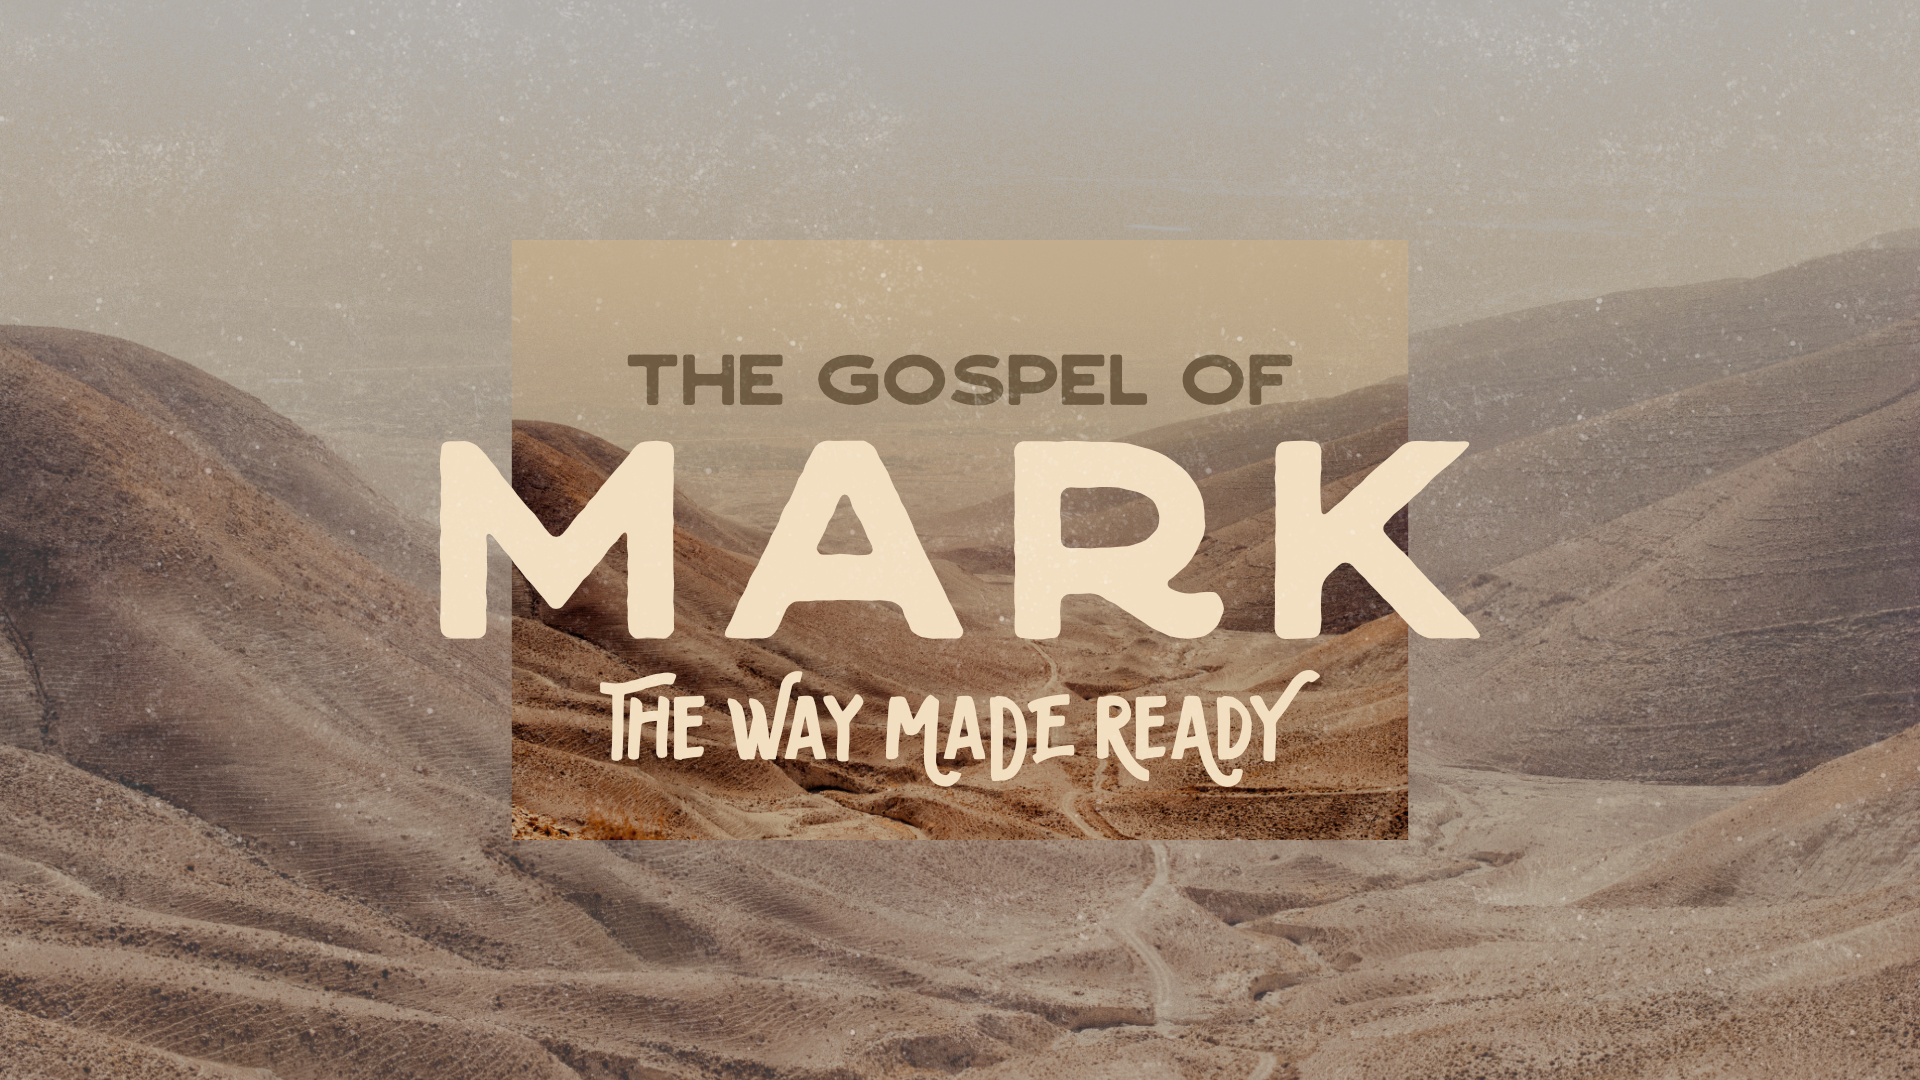 Gospel of Mark: The Way Made Ready 2 – Unhindered Mark 1:21-34